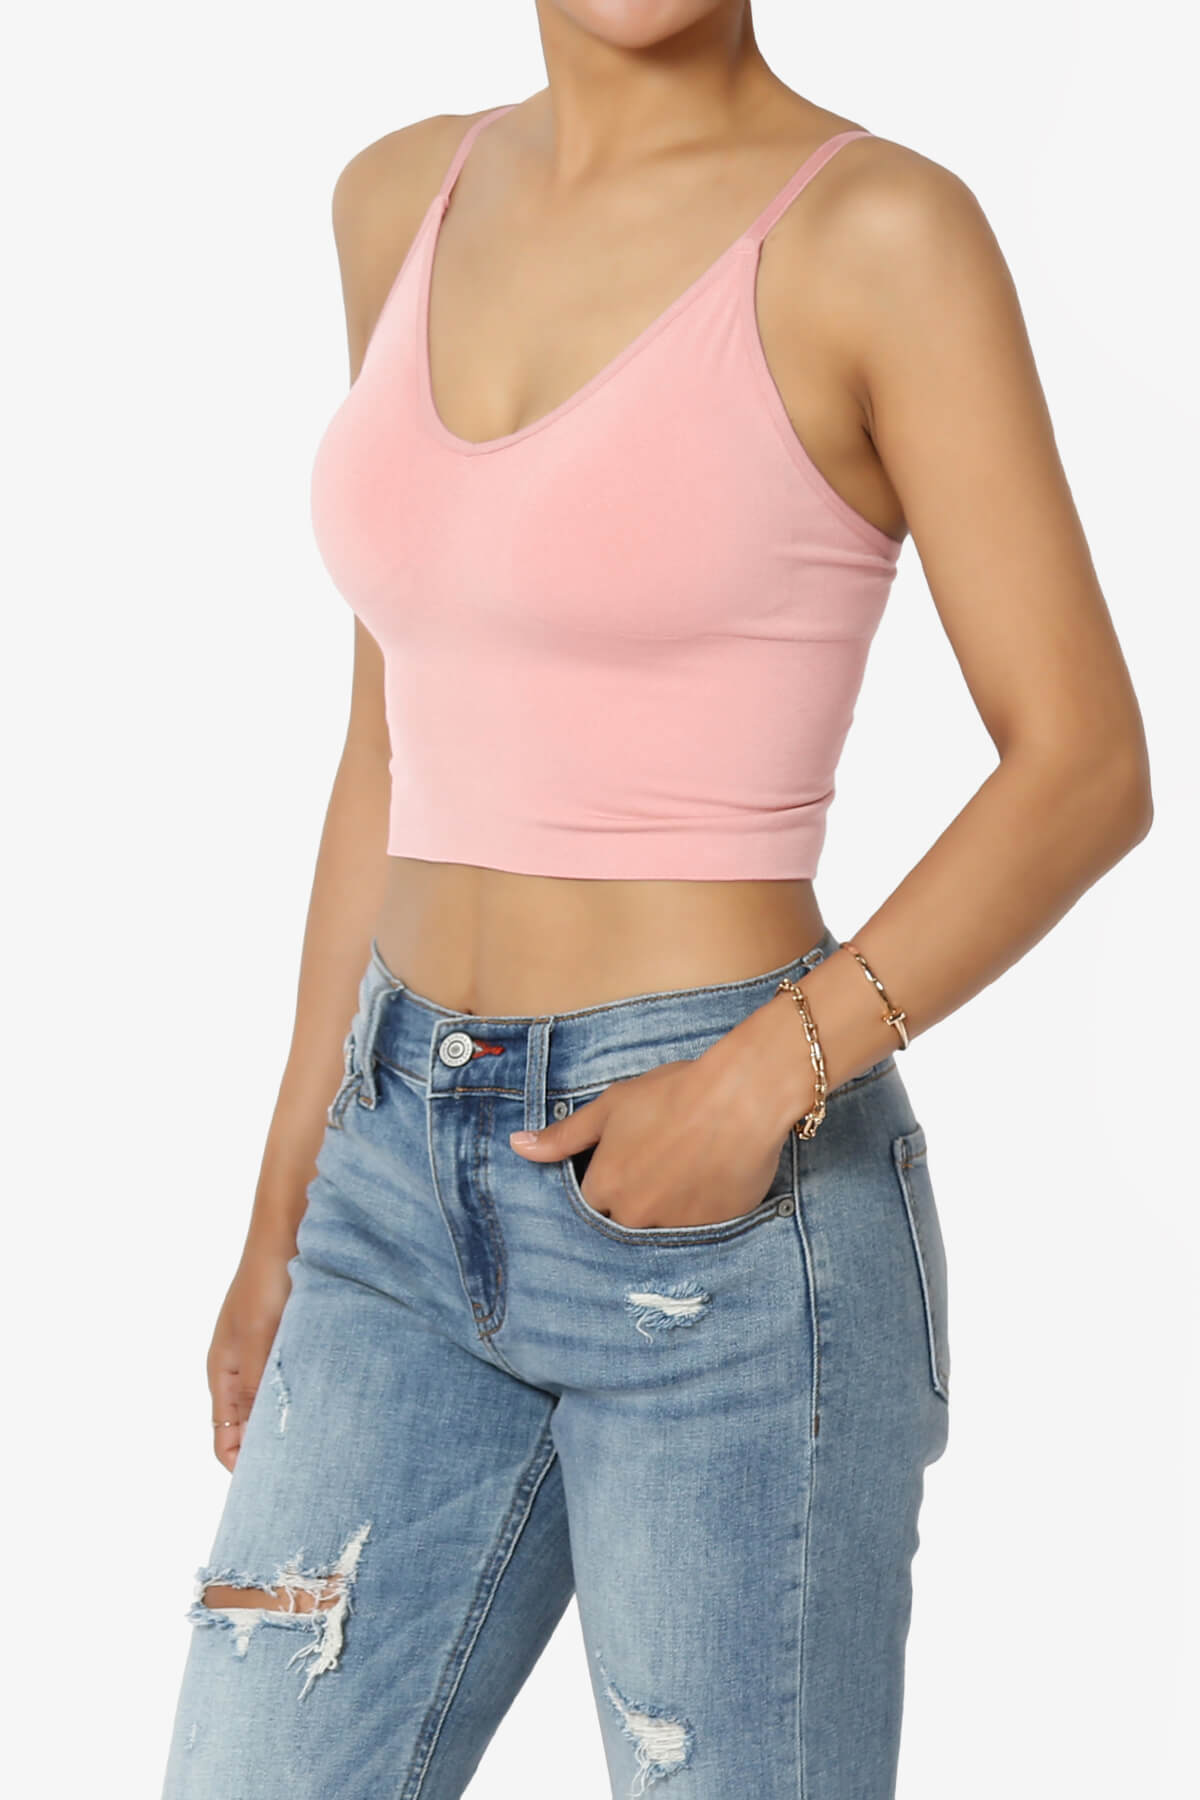 Load image into Gallery viewer, Melena Cross Back Triangle V-Neck Crop Cami LIGHT PINK_3
